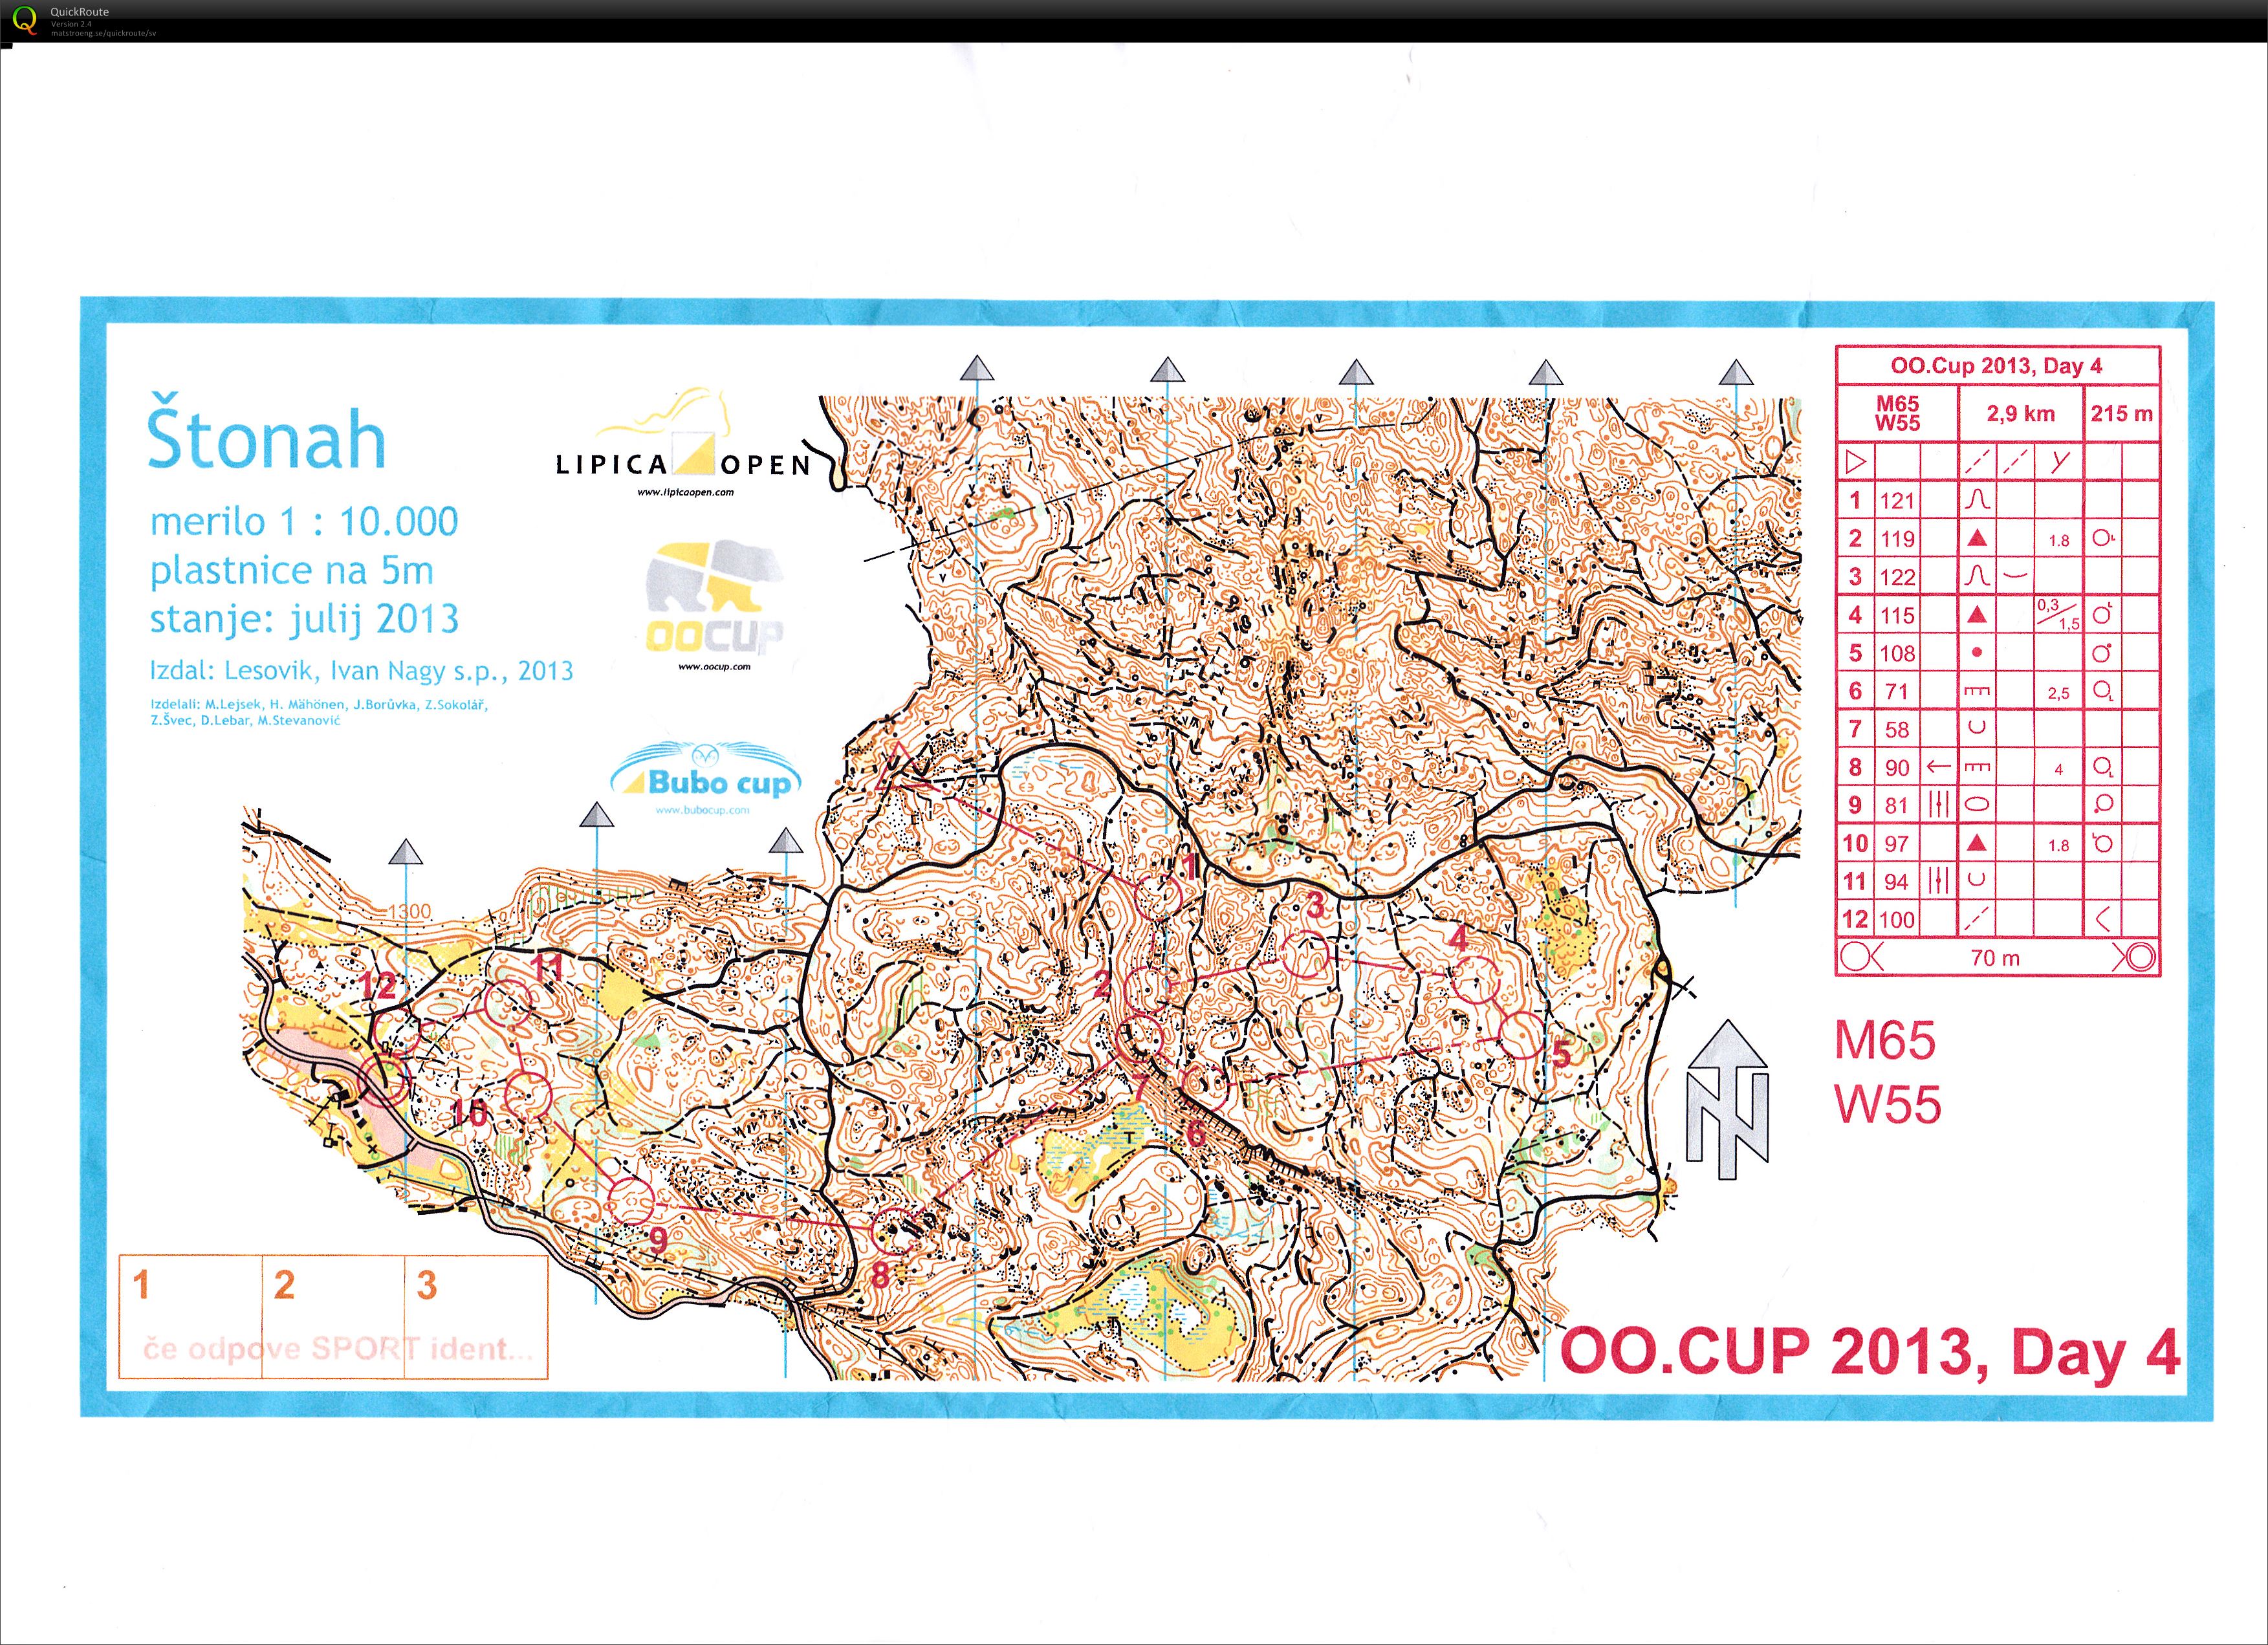 OOCup 2013 Stage 4 (29.07.2013)